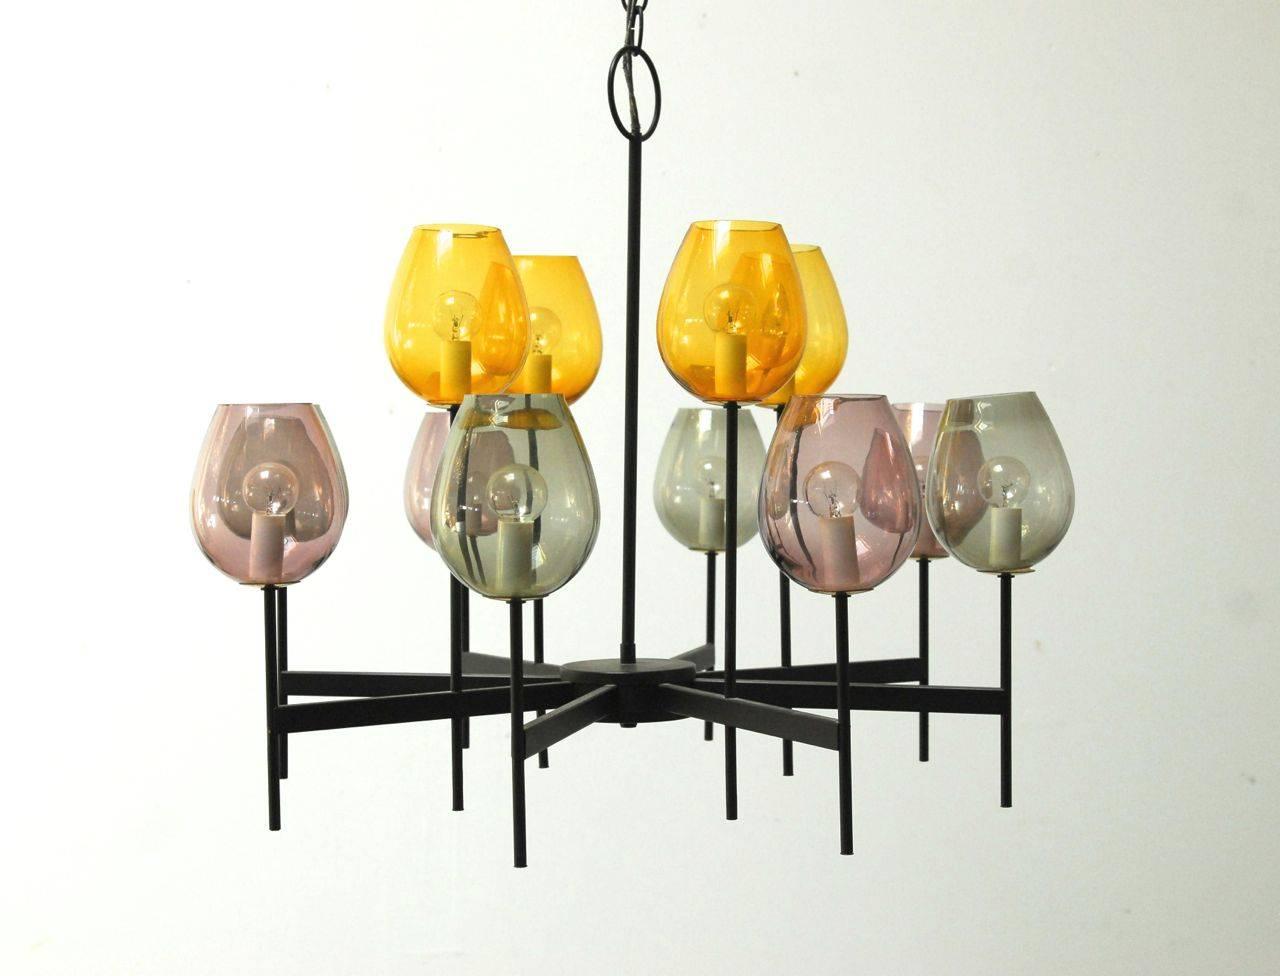 Extremely rare Mid-Century chandelier features a Minimalist architectural form of eight arms from which twelve rods extend. Each surmounted by a light with a handblown glass tulip cover in either smoked, amber, or lavender color. Top quality